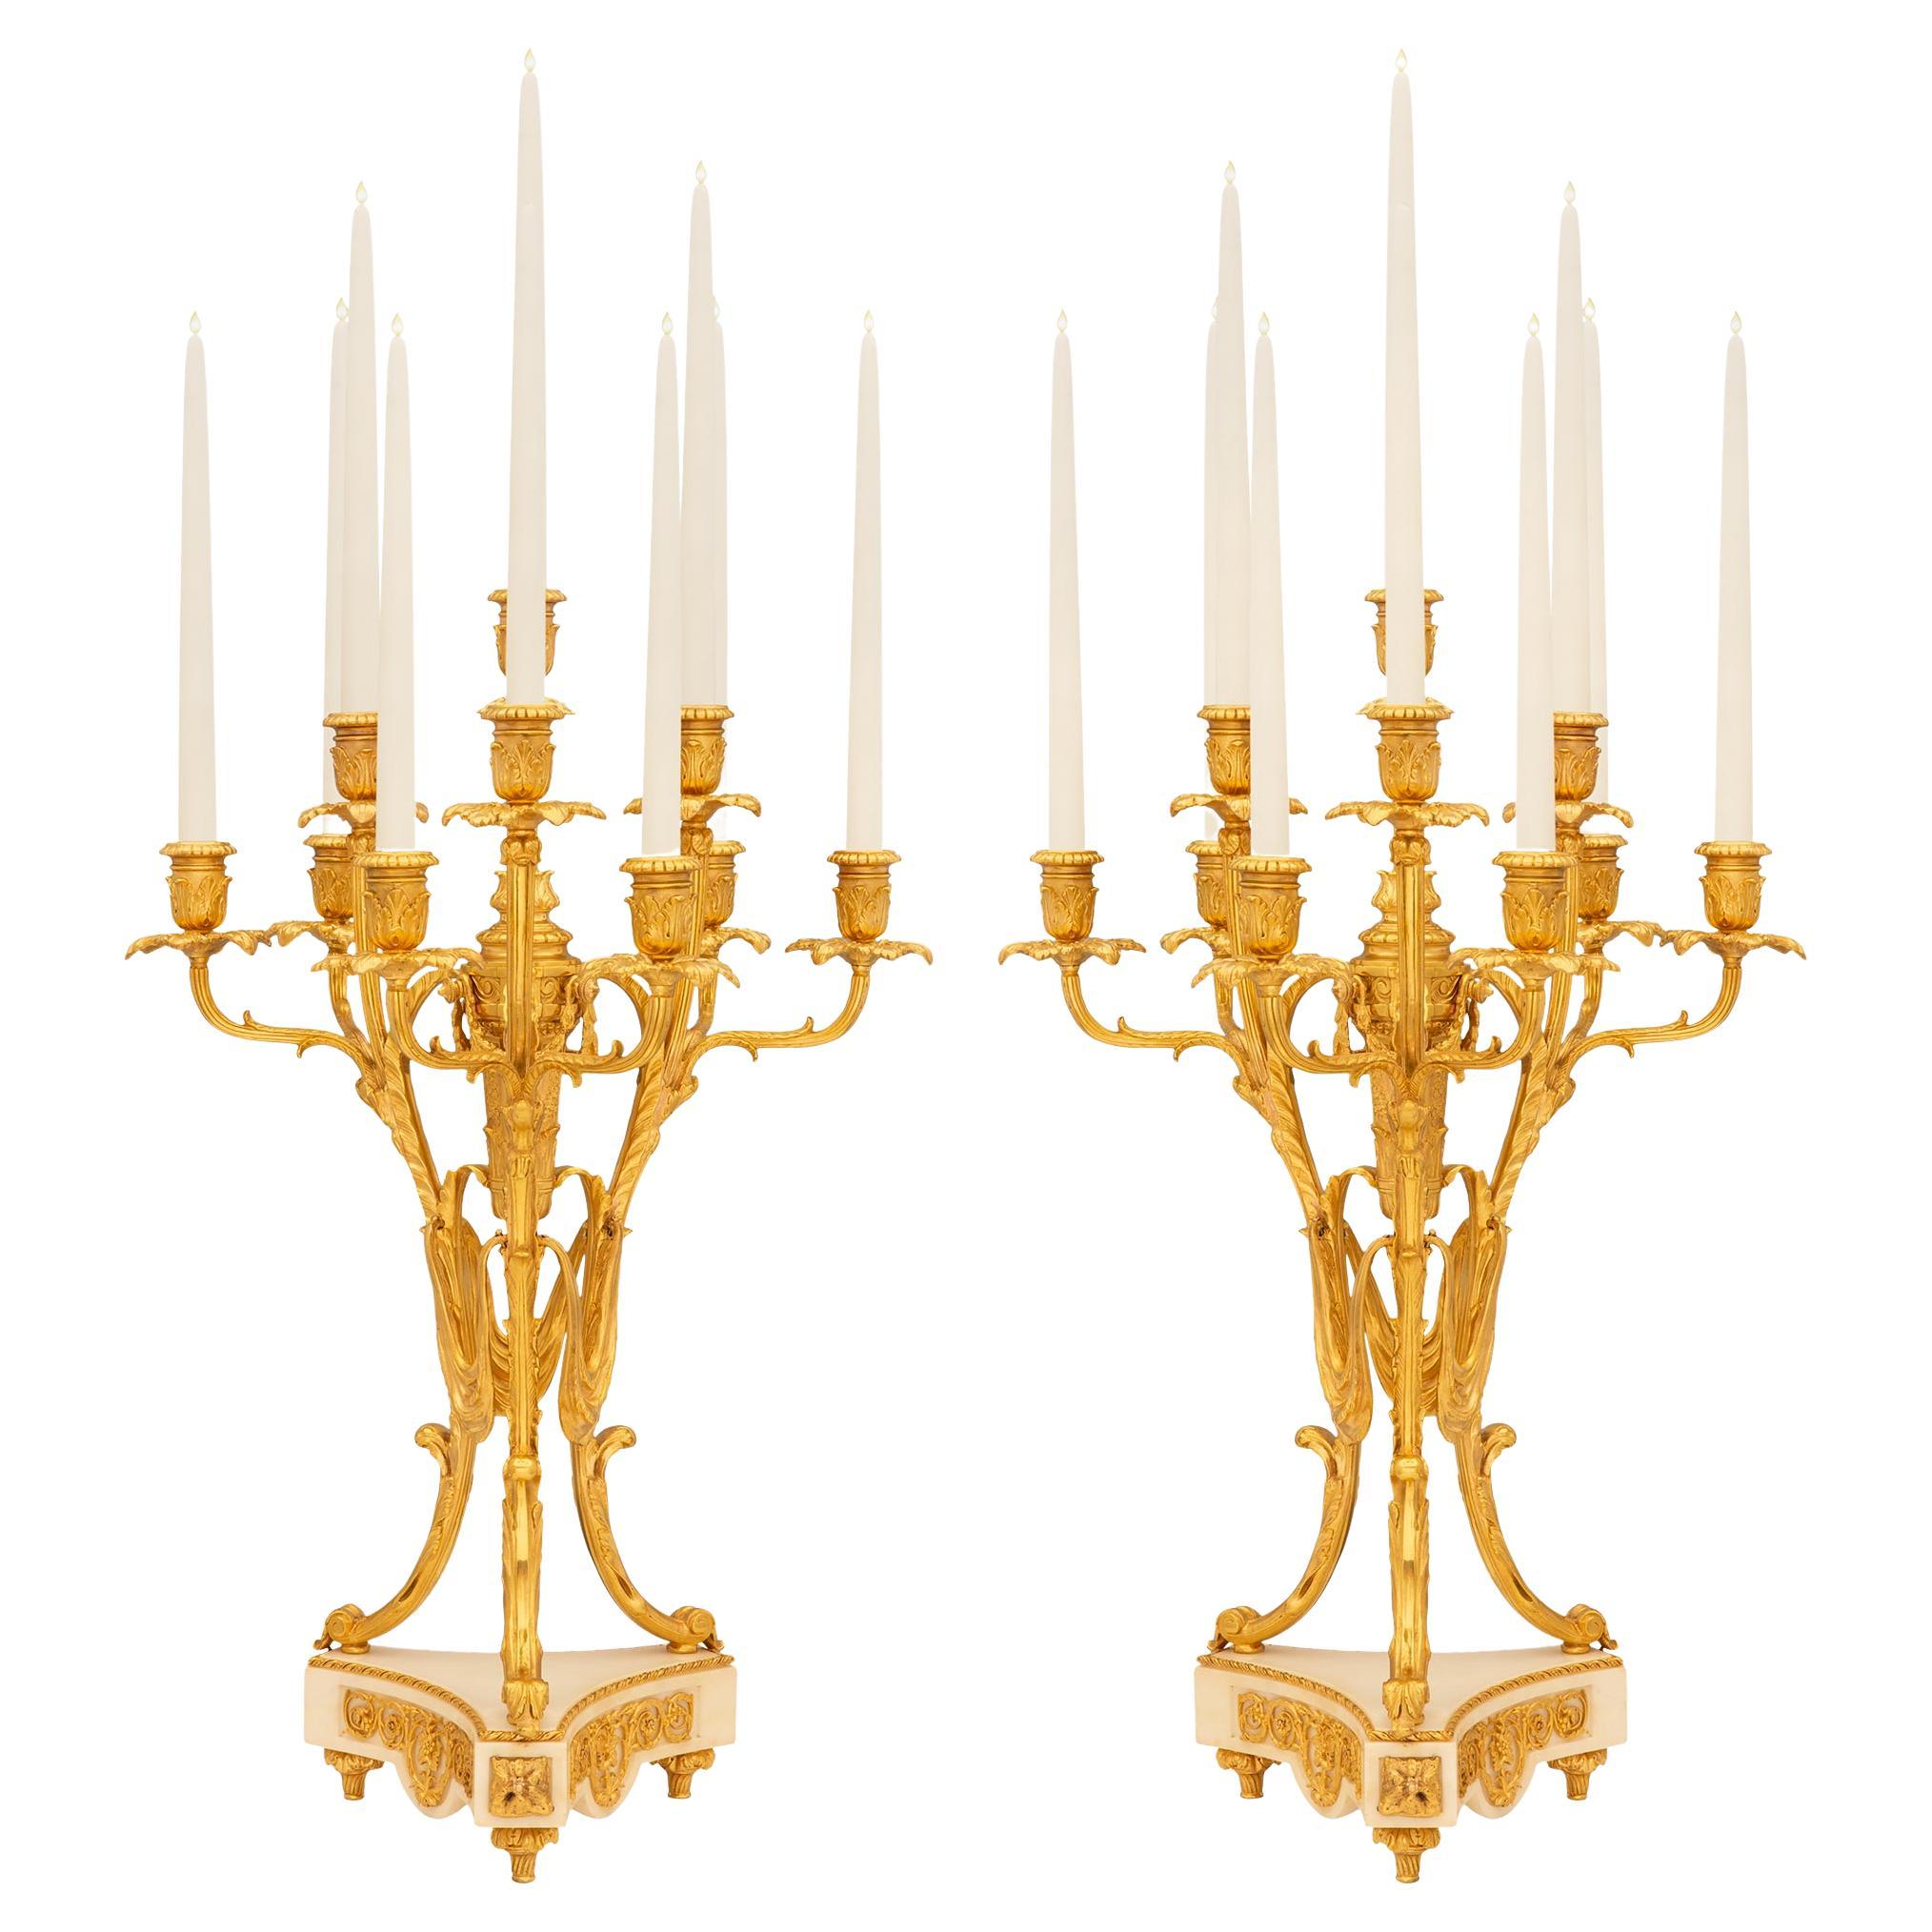 Pair Of French 19th Century Belle Époque Period Ormolu And Marble Candelabras For Sale